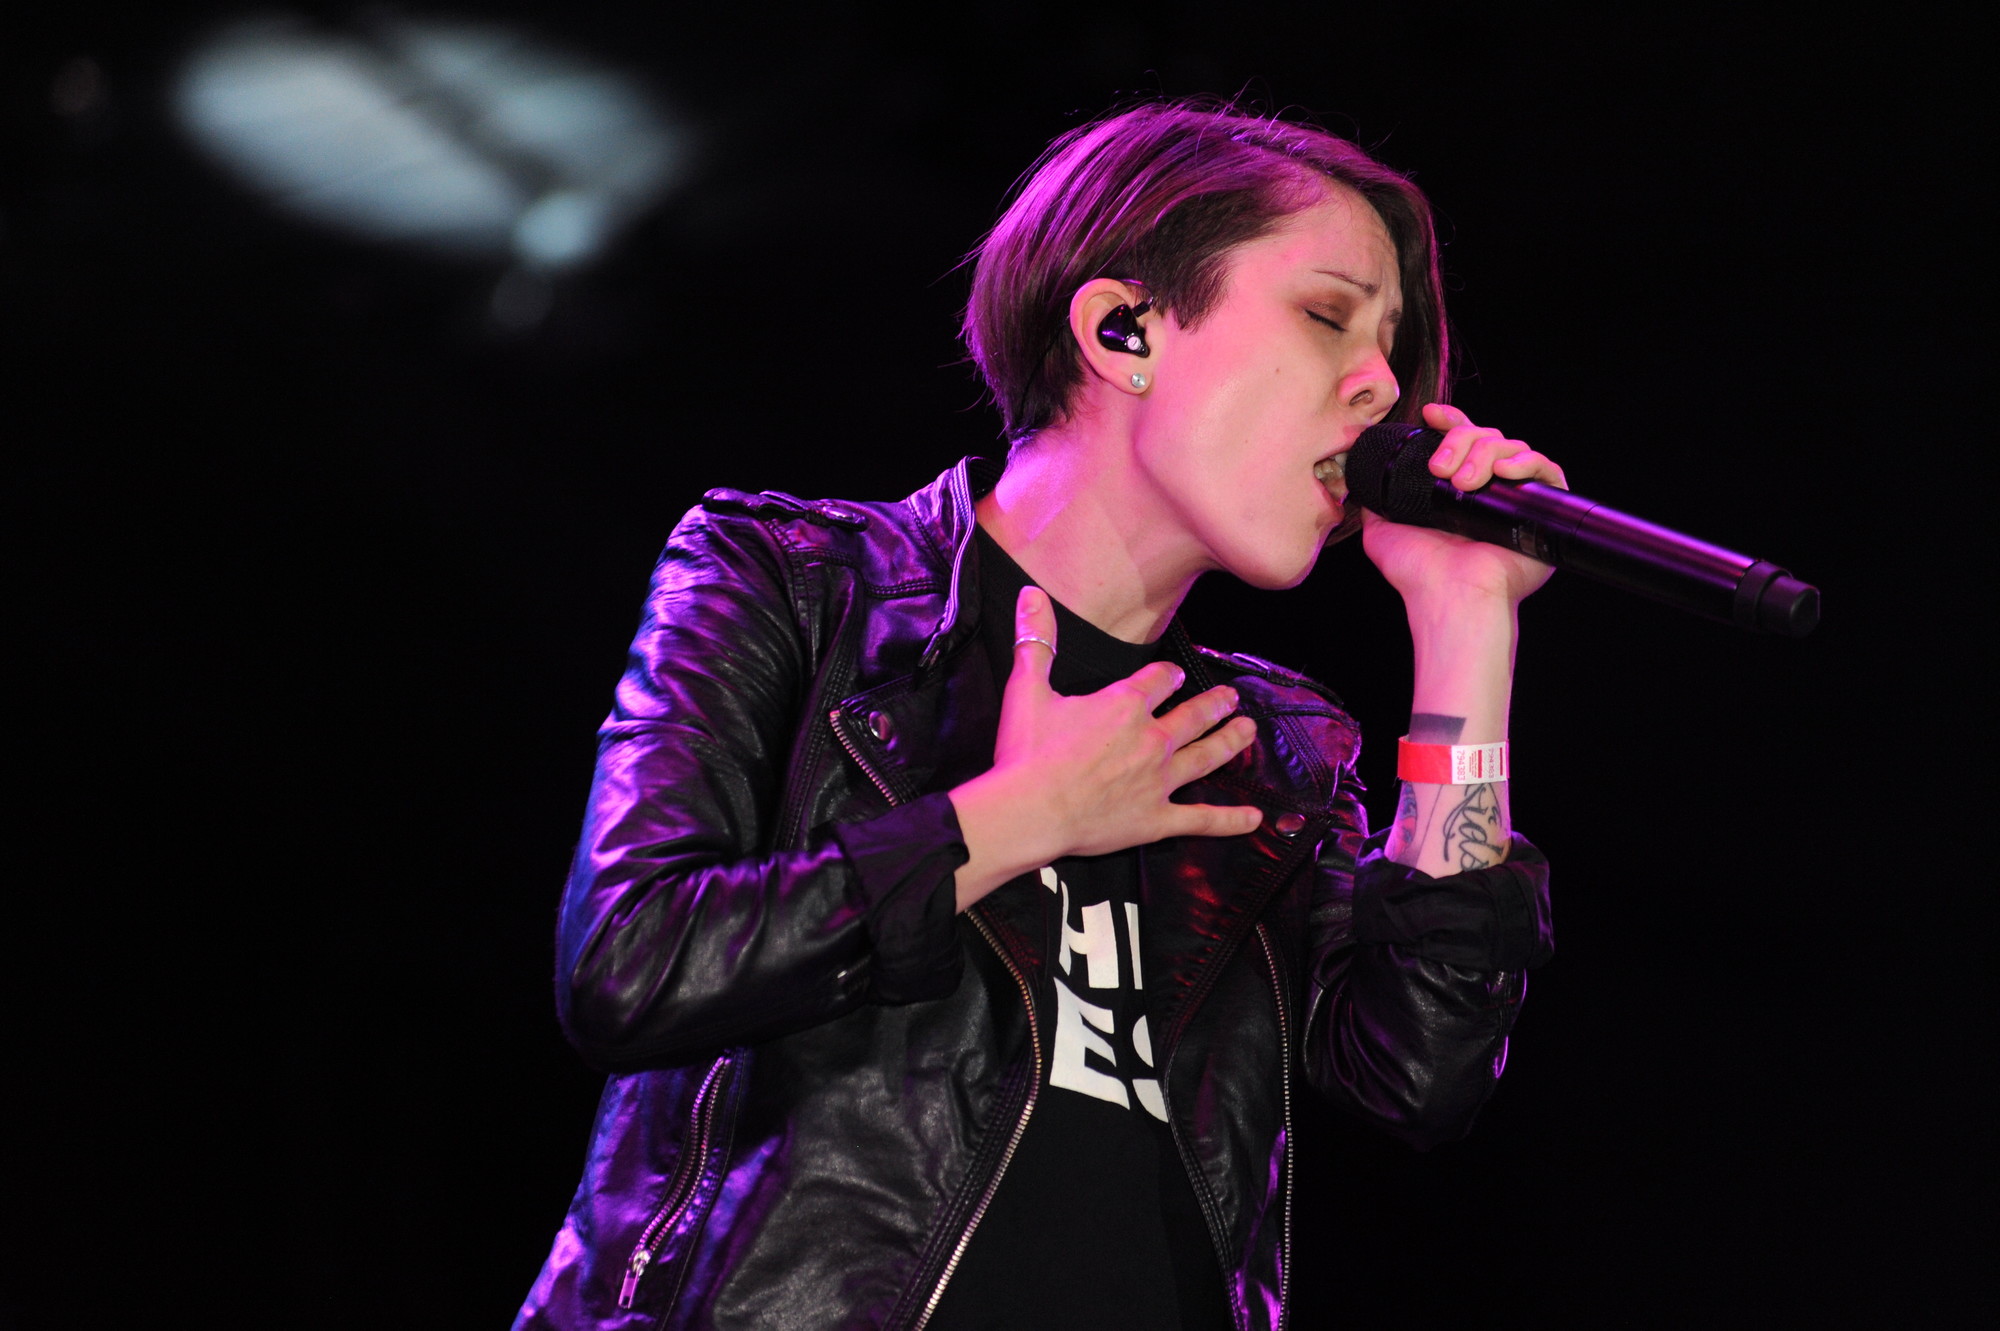 Tegan and Sara, identical twin sisters from Calgary, opened for Christina Perri at the Harry Chapin Lakeside Theatre.